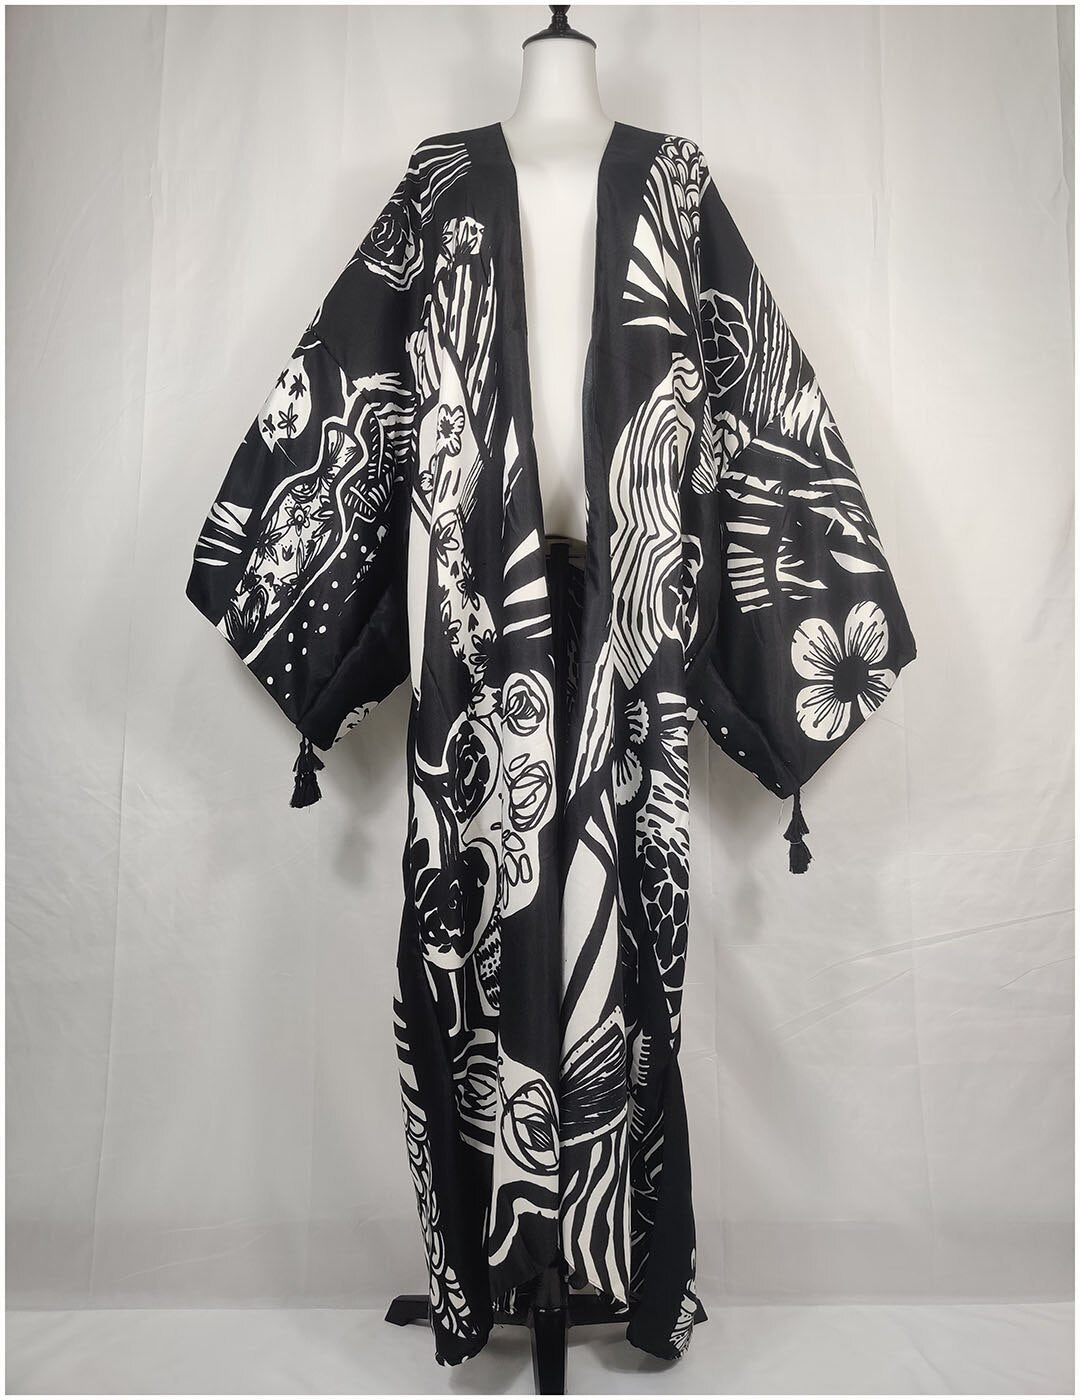 Women Casual Floral Kimono Dress Perfect for Beach Days African Swimwear in Vintage Inspired Open Front Kaftan Style - Flexi Africa - Flexi Africa offers Free Delivery Worldwide - Vibrant African traditional clothing showcasing bold prints and intricate designs